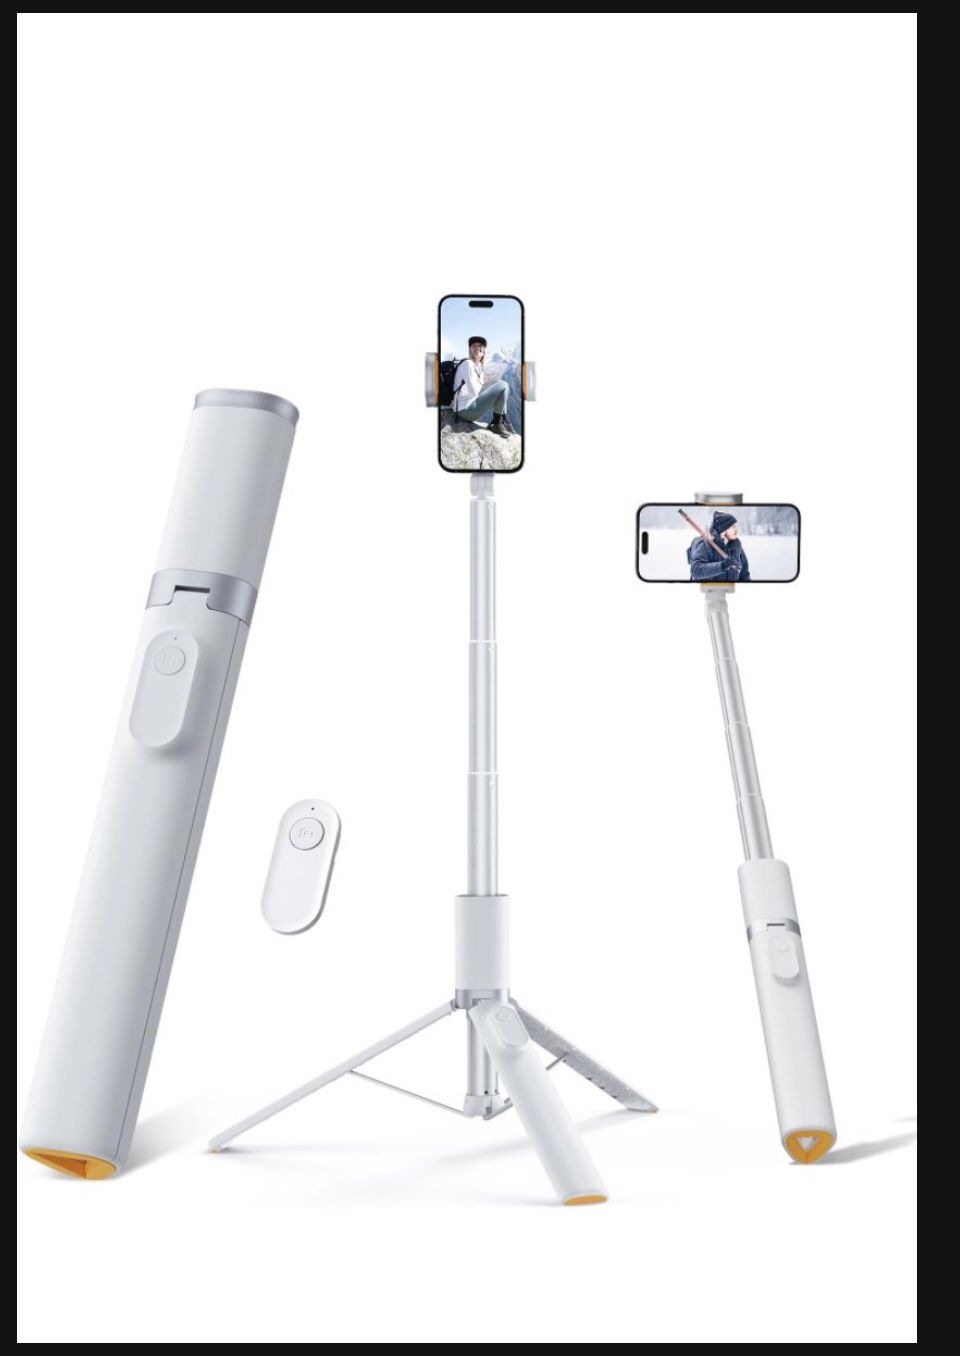 64” Phone Tripod For iPhone—new in box 